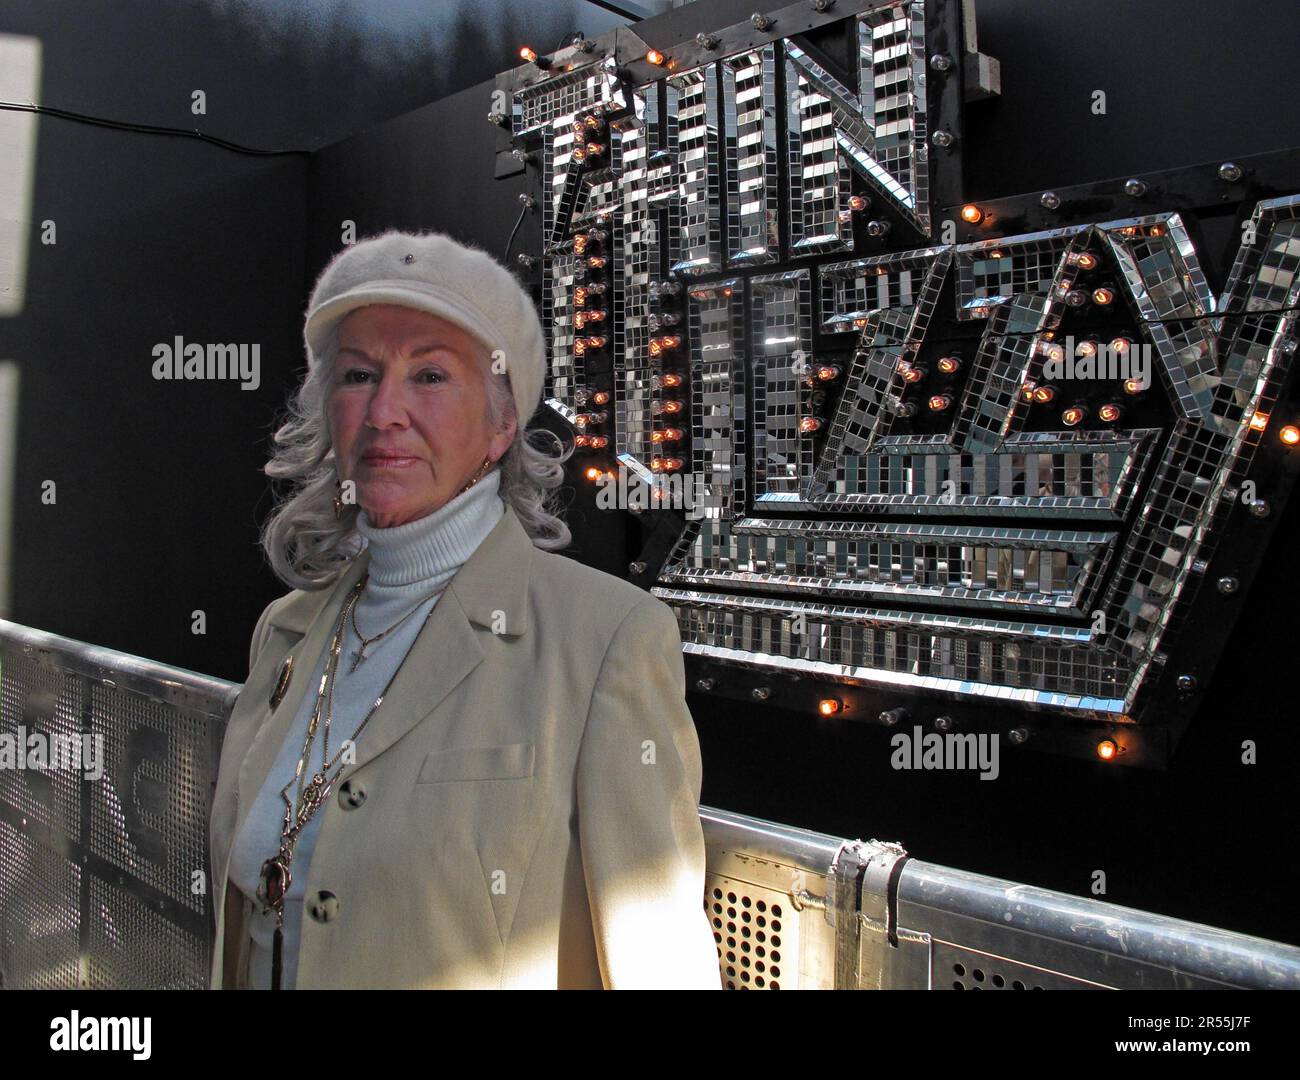 Philomena Lynott , from Crumlin, mother of Phil Lynott - Philip Parris Lynott, stands in front of the iconic Thin Lizzy lights, Dublin, Eire, Ireland Stock Photo